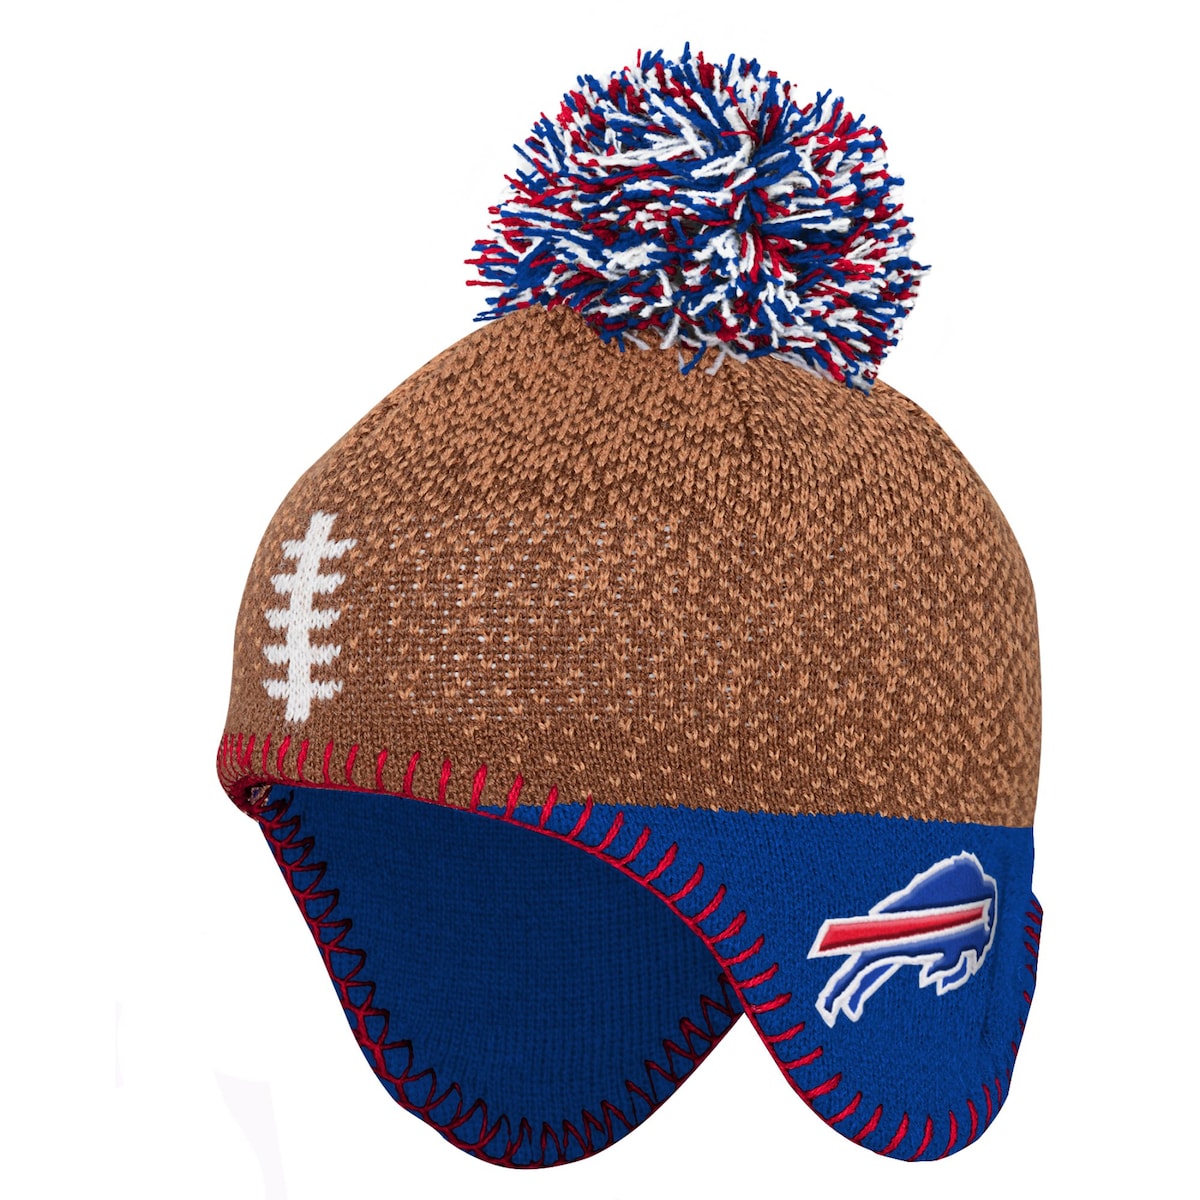 Help your little fan generate extra warmth in an adorable way with this Buffalo Bills Football Head knit hat. Its fun design features a speckled pattern, football laces and a multicolor pom that highlights the embroidered Buffalo Bills logo and contrast-color stitching. Ear flaps provide added coverage and coziness.Embroidered graphicsKnit designOfficially licensedOne size fits mostImportedOver-the-ear flapsBrand: OuterstuffPom on top